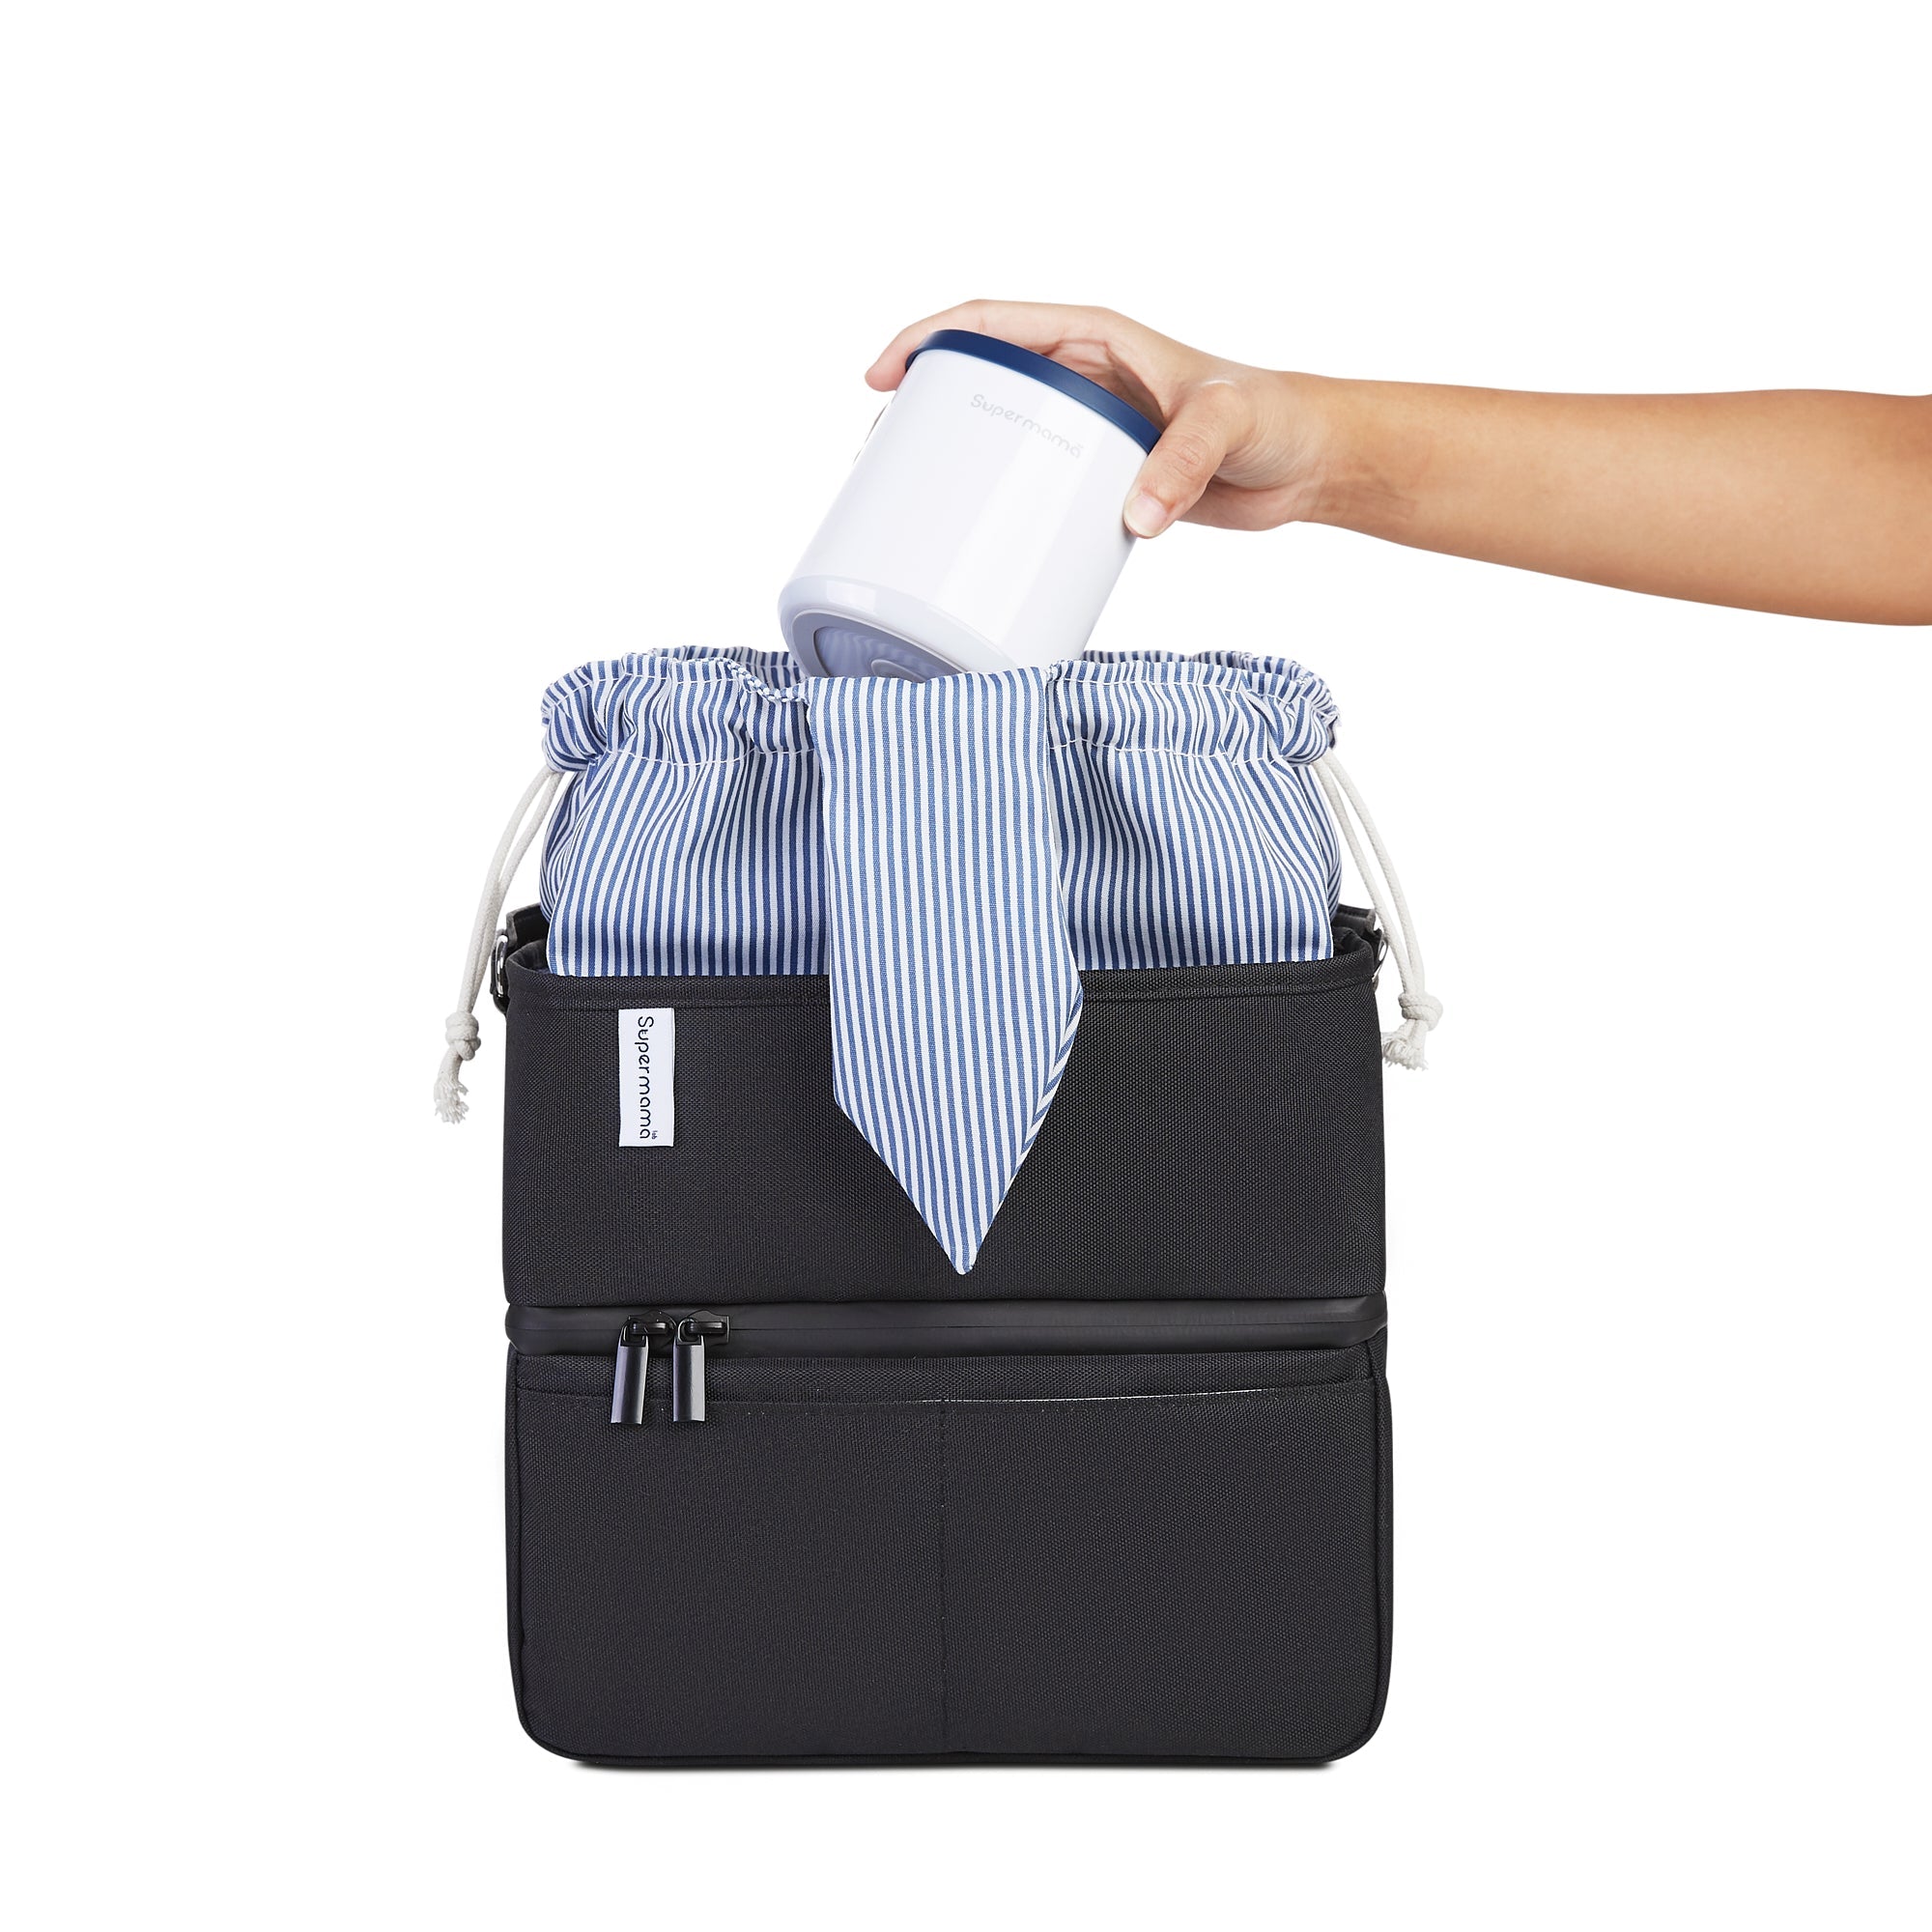 Insulated Cooler Bag with milk warmer